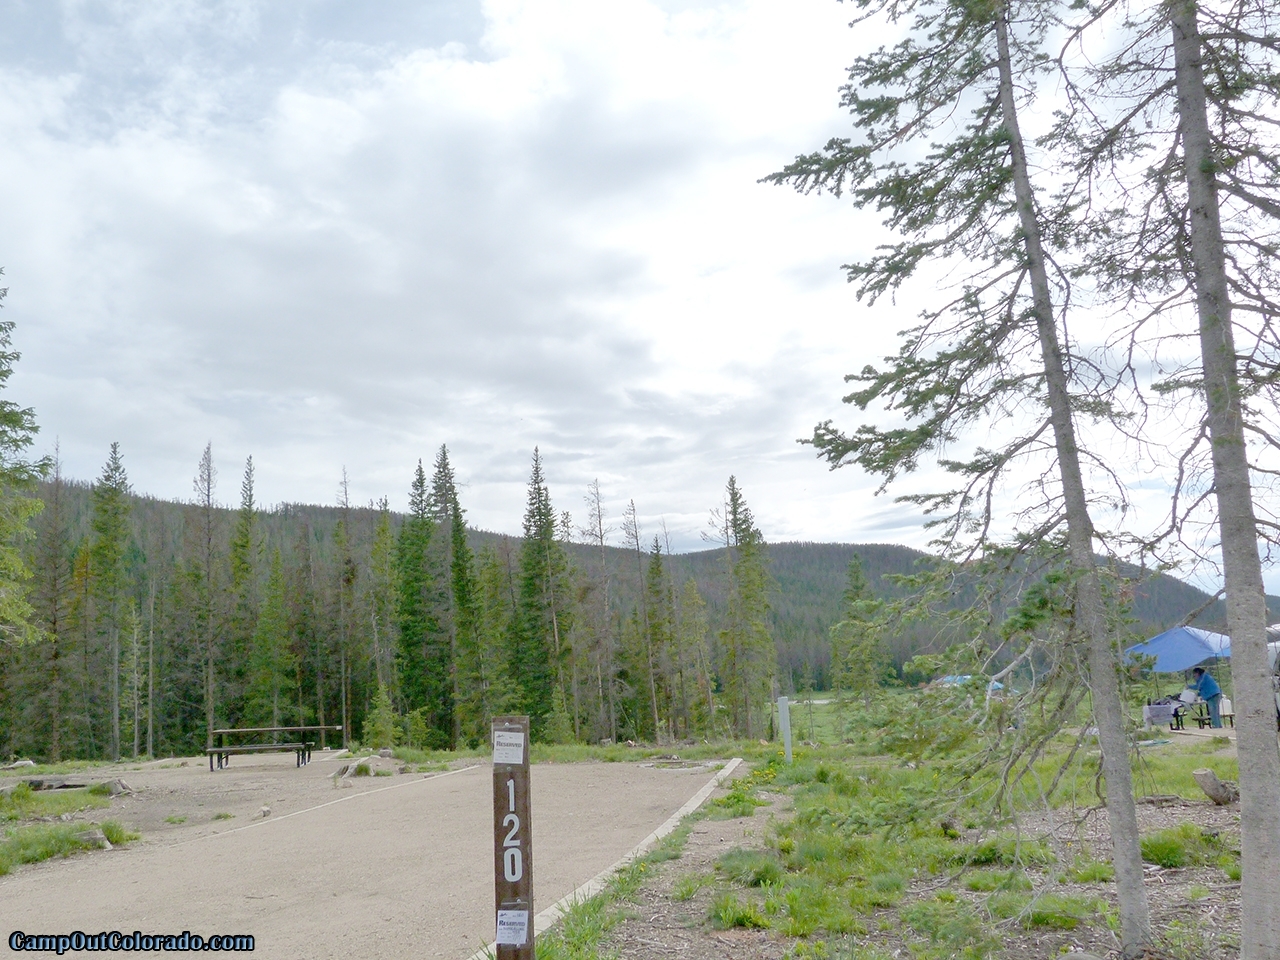 camp-out-colorado-ranger-lakes-campground-camper-spot.jpg